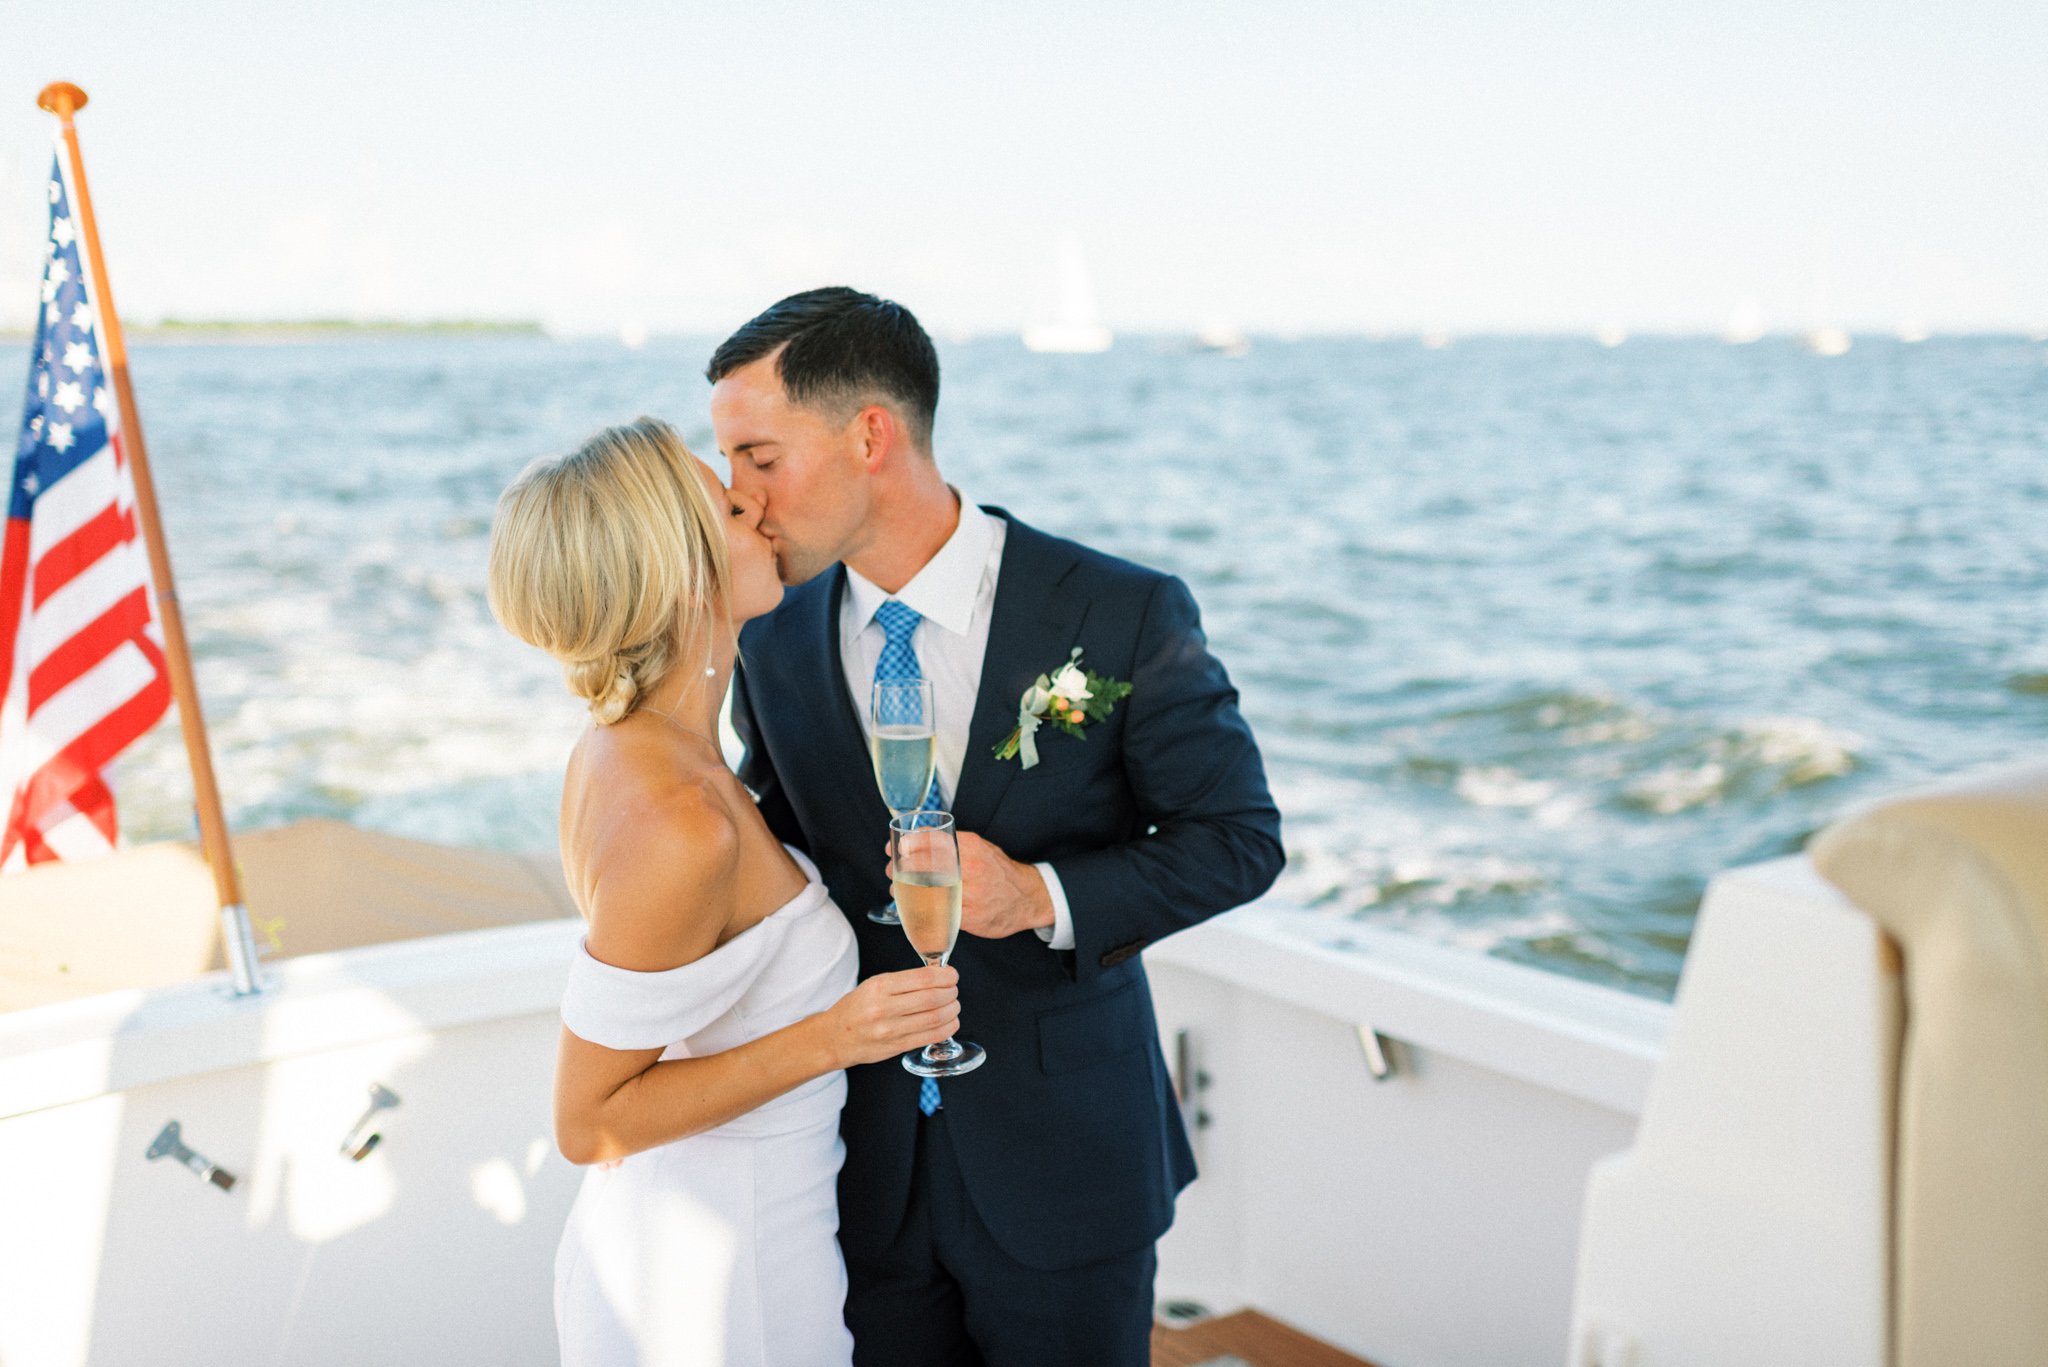 Gray_Joiner_e. losinio photography_annapolis-maryland-waterfront-elopement-331